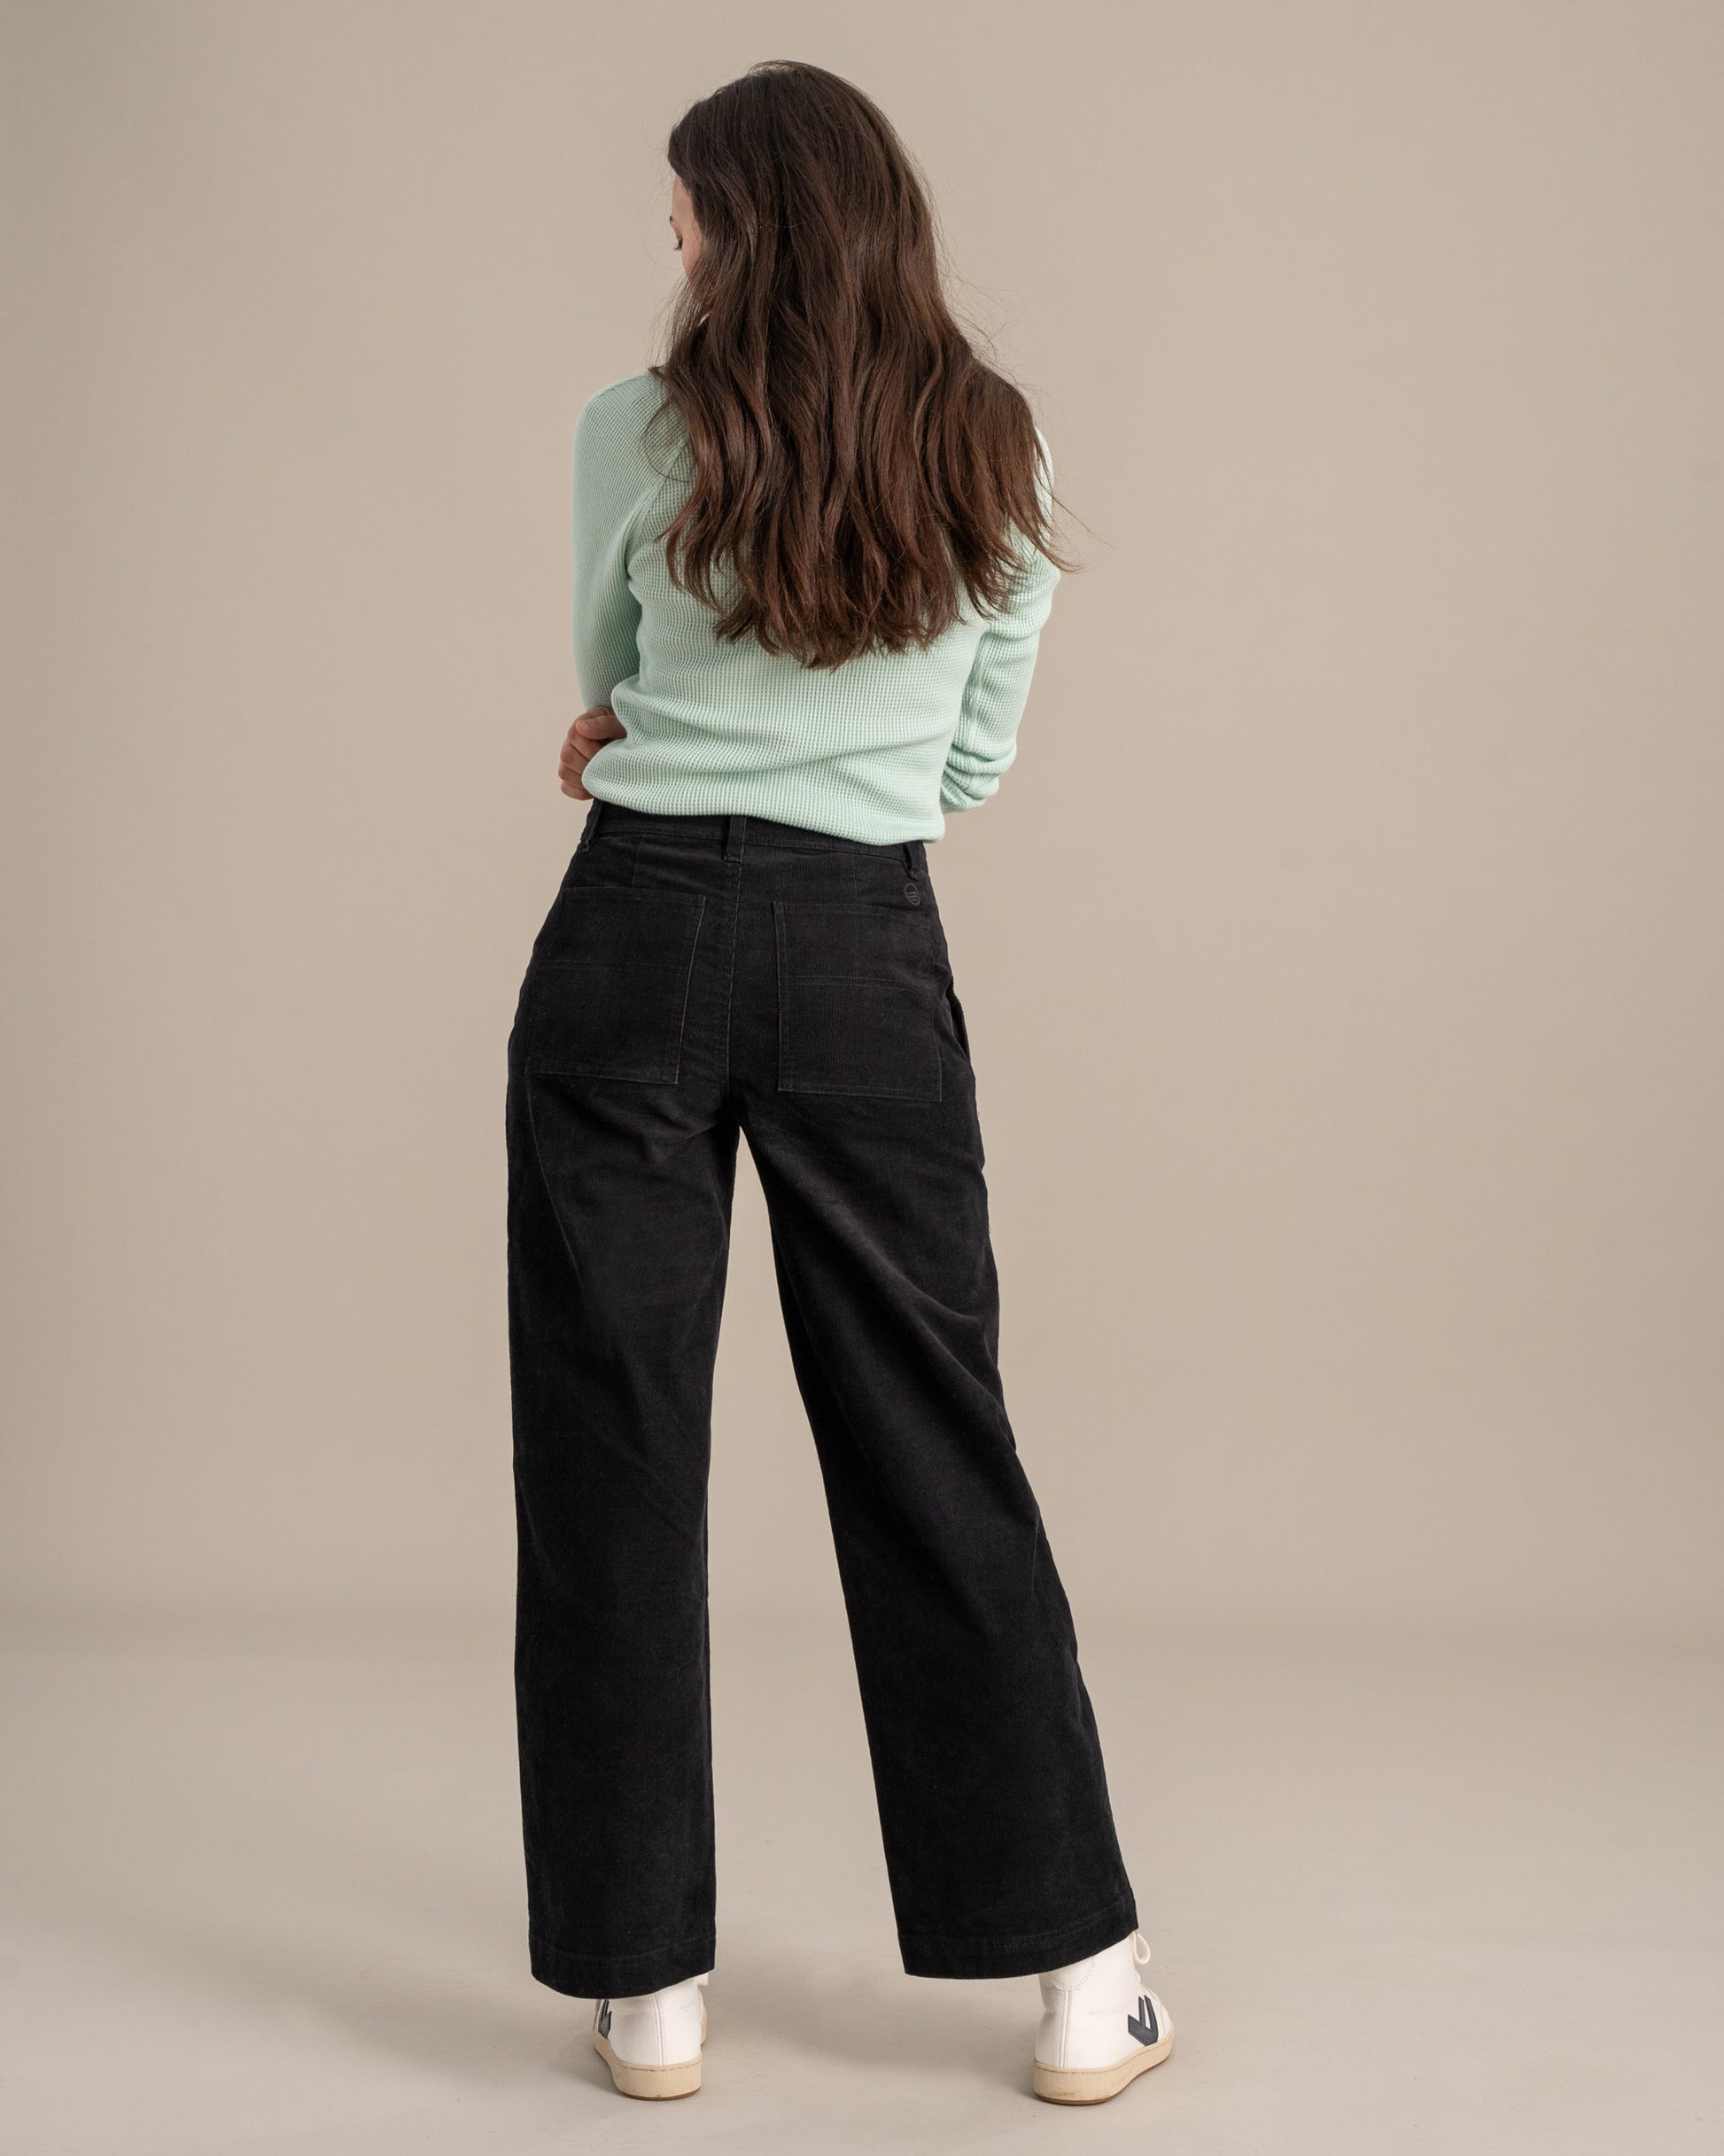 Women's Classic Corduroy Peg Pant made with Organic Cotton